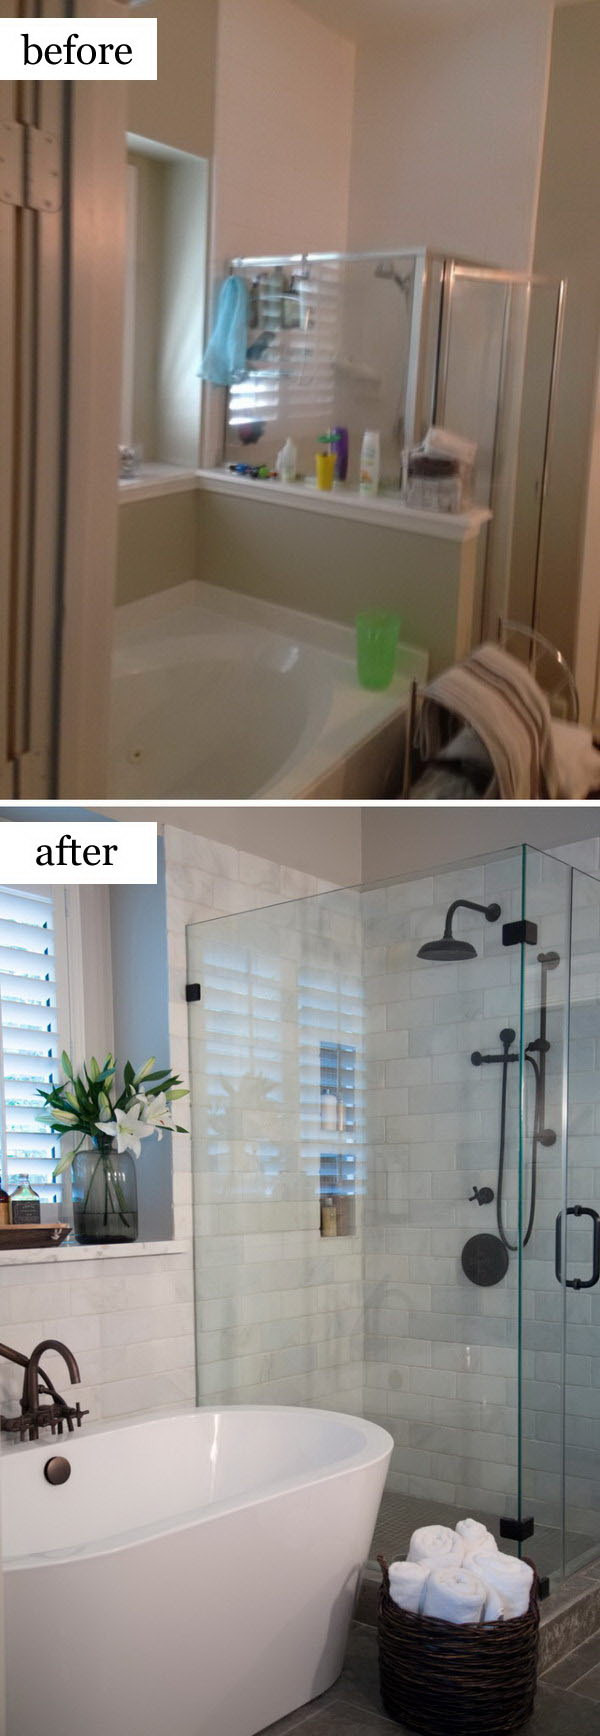 Remodeling Bathroom Ideas
 Before and After Makeovers 20 Most Beautiful Bathroom